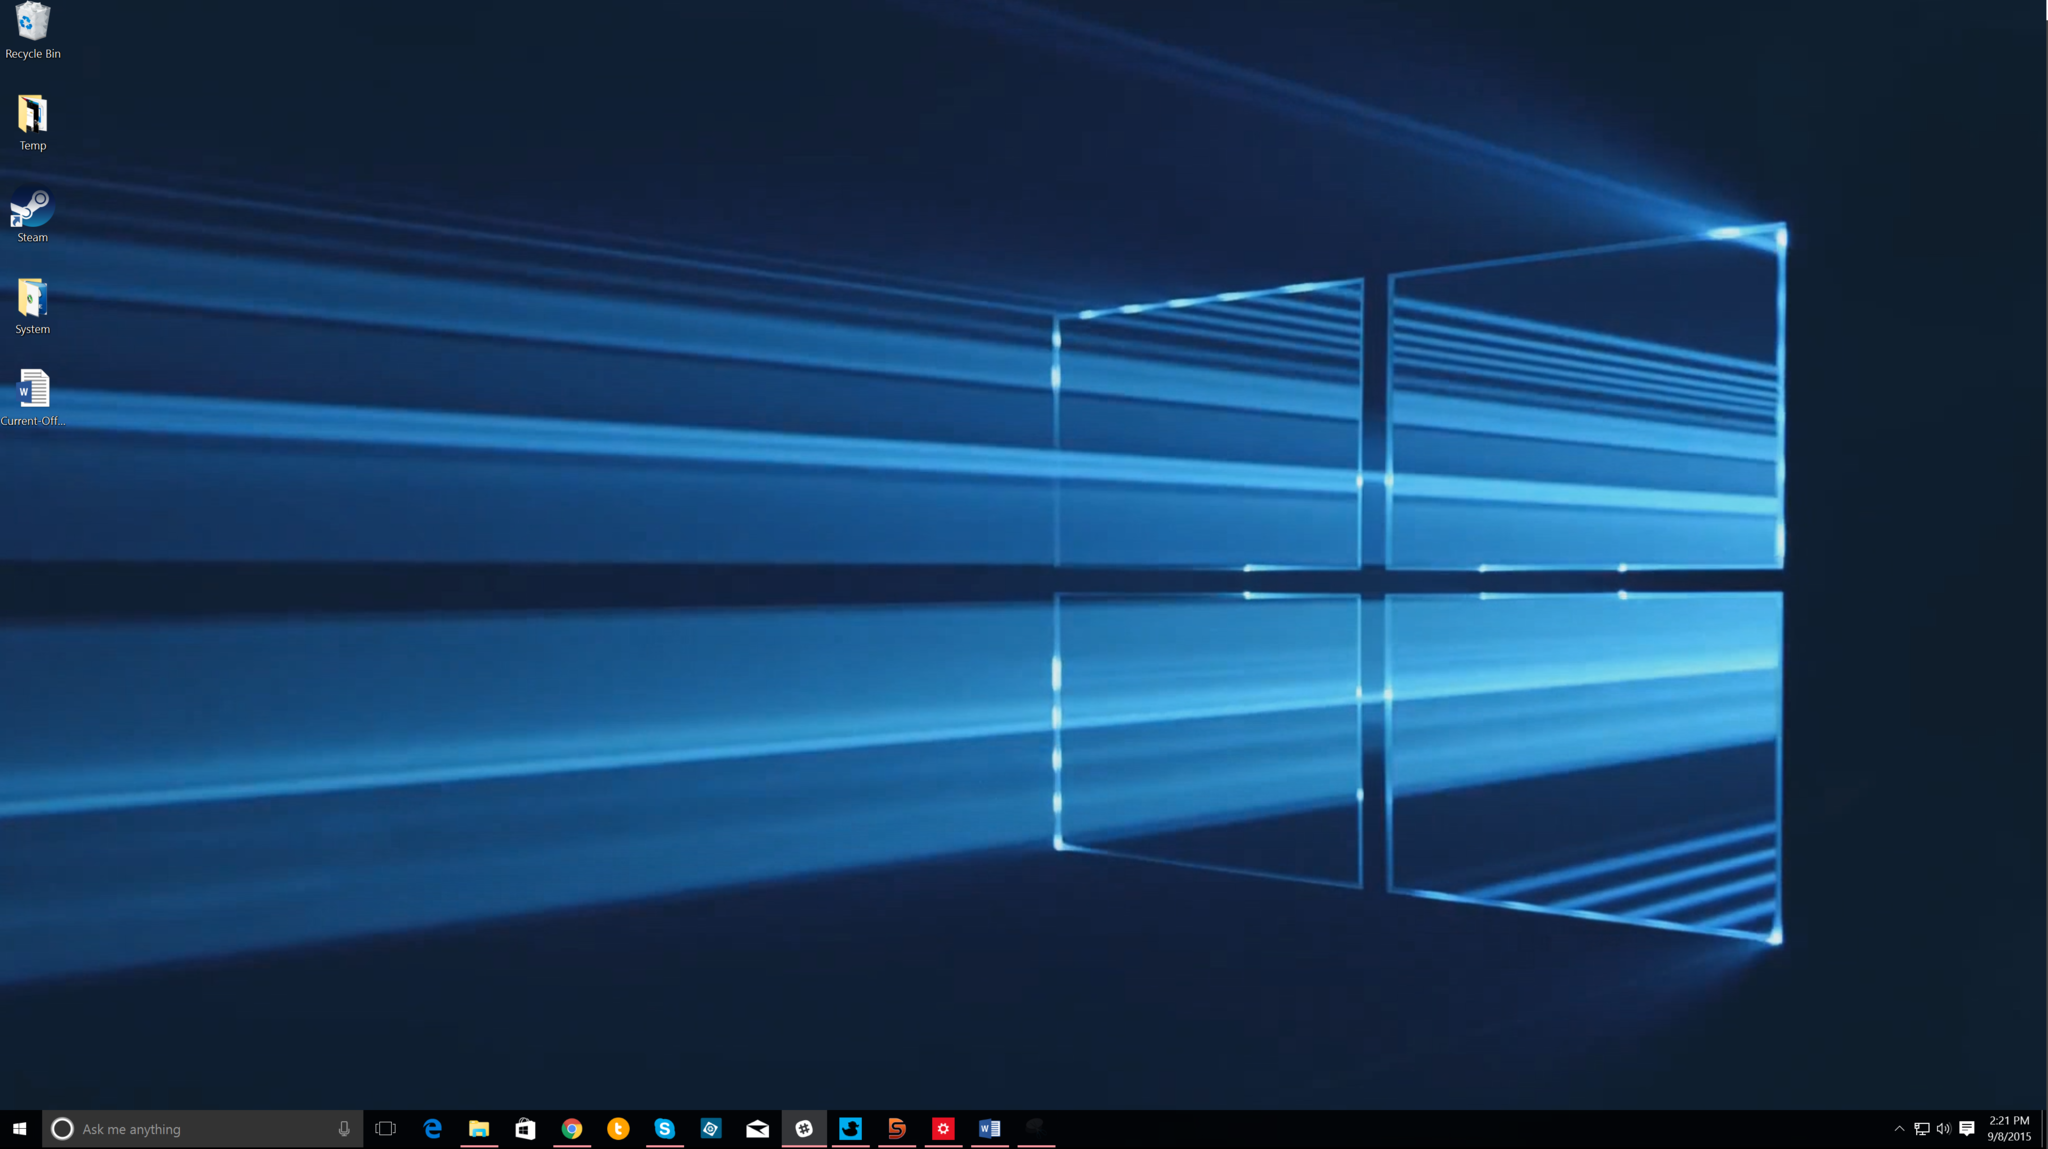 How To Get An Animated Desktop In Windows 10 With Deskscapes 8 Central - How To Get Animated Wallpapers Pc Free